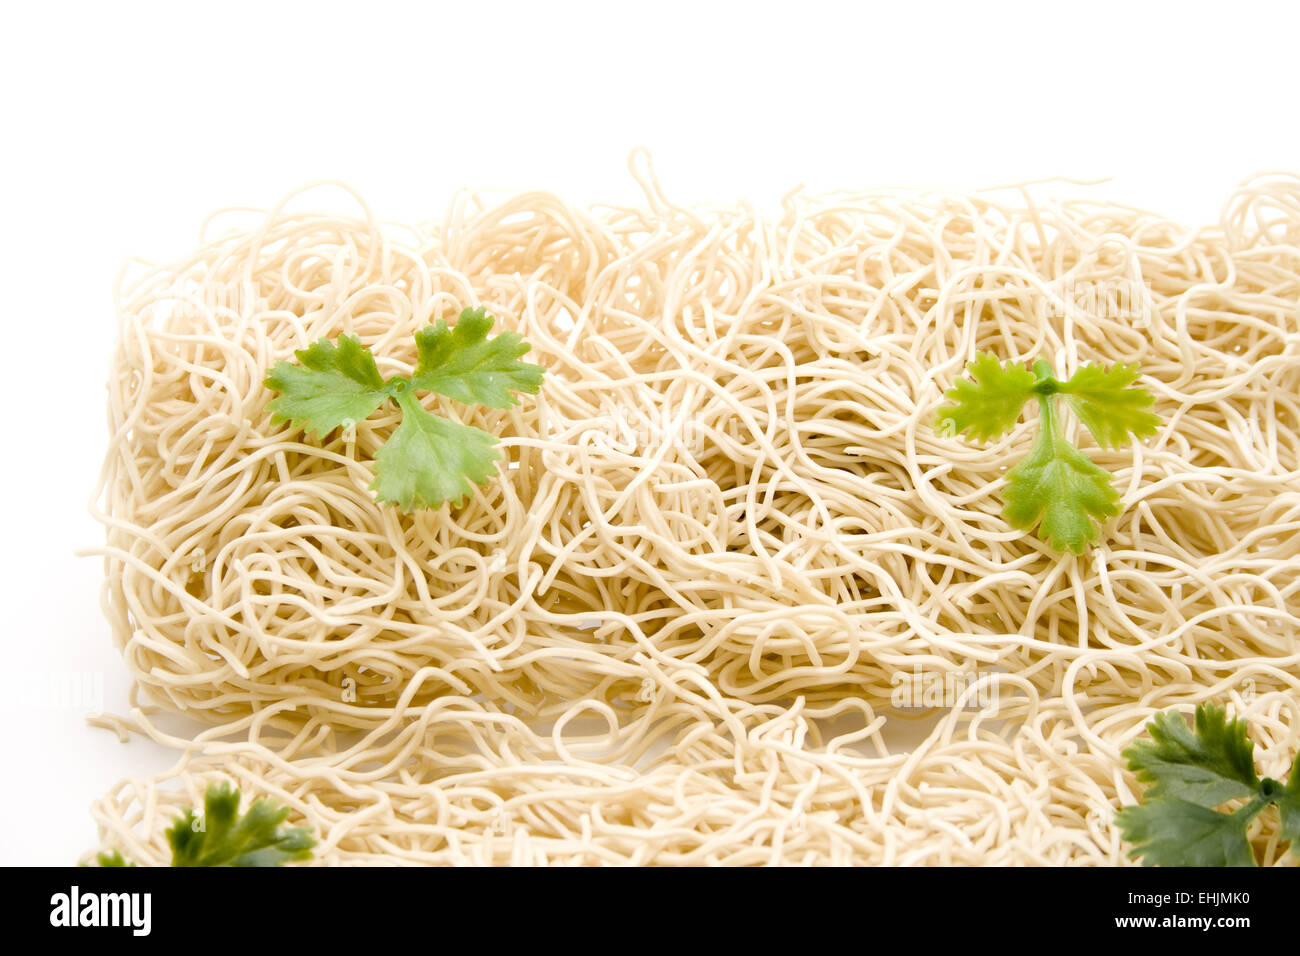 Thread noodle with parsley Stock Photo